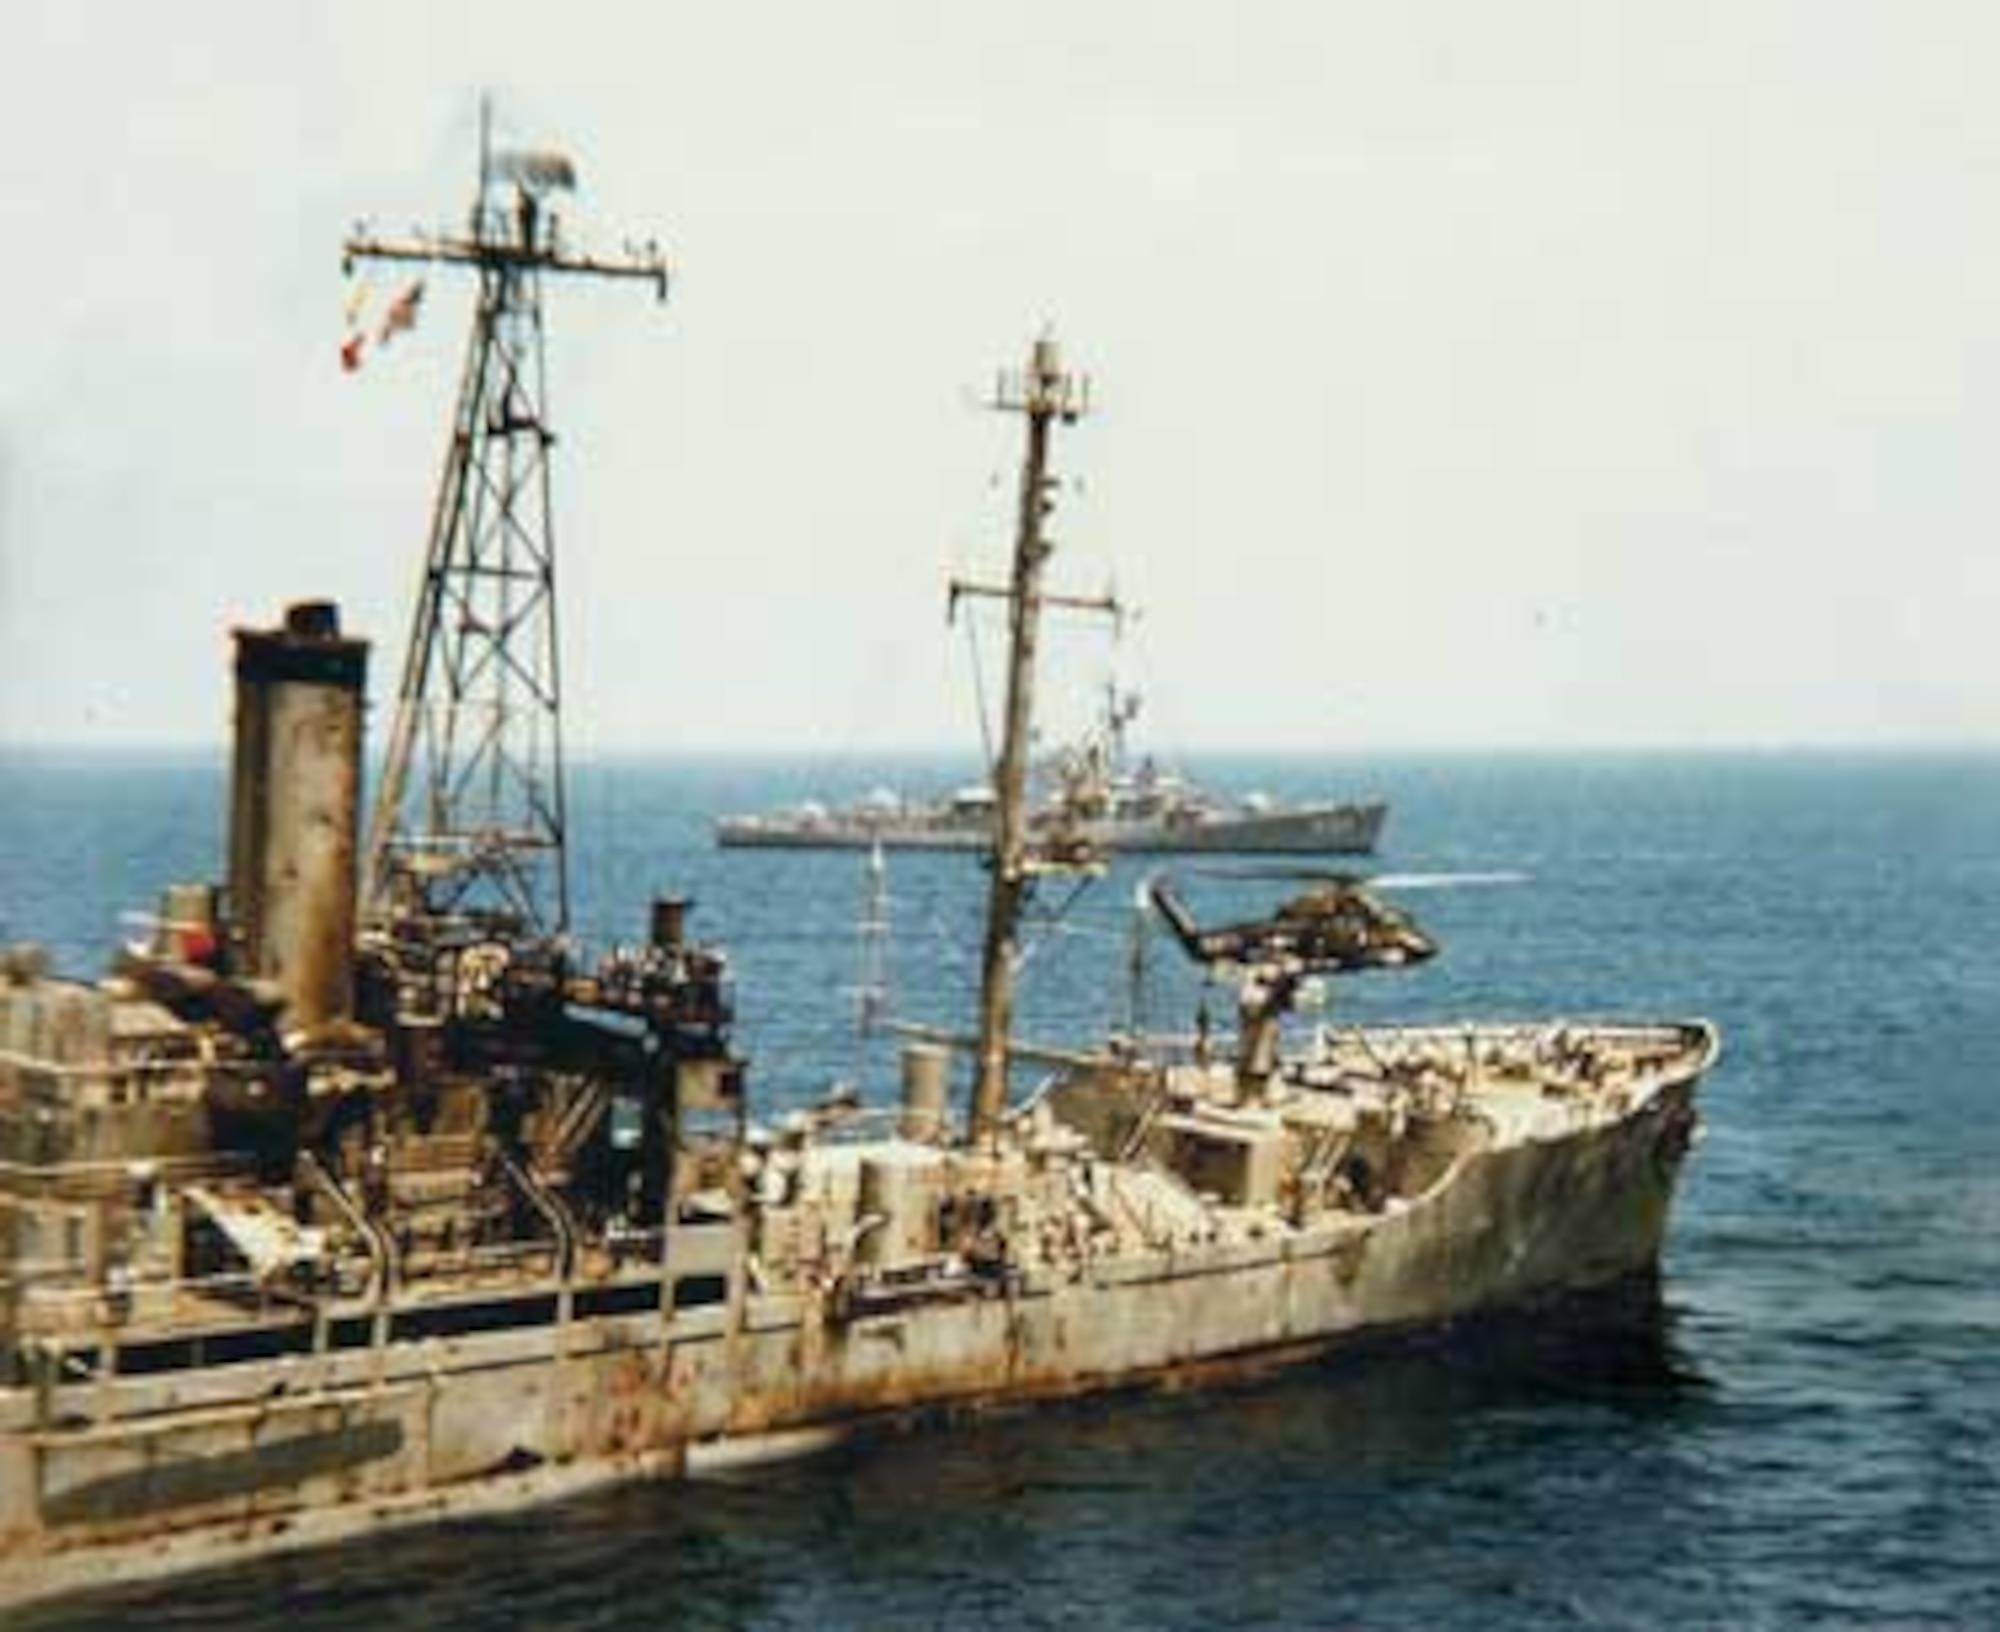 The USS Liberty is left listing to starboard after a sustained air and sea attack July 8, 1967. (Courtesy photo)